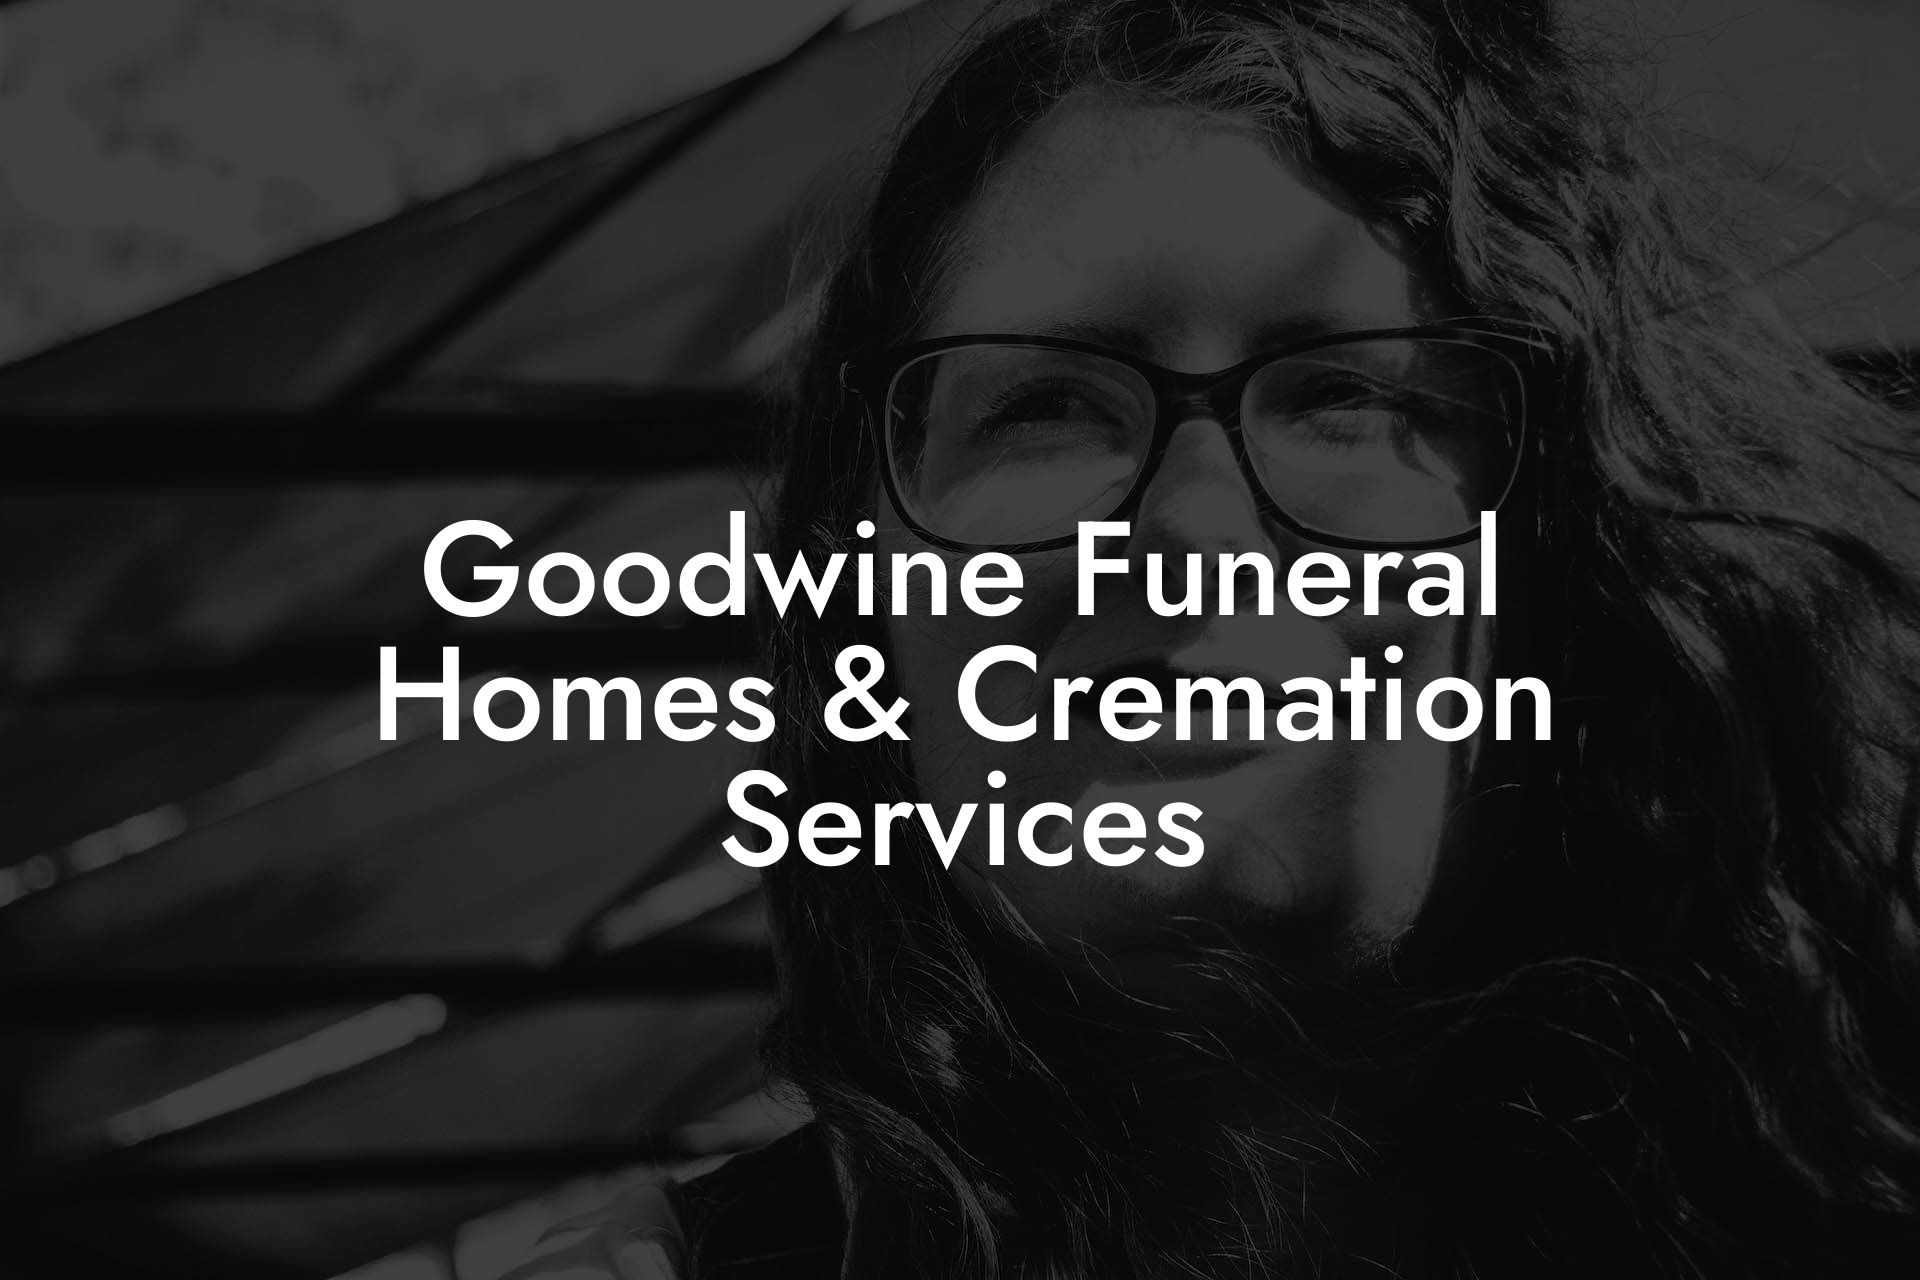 Goodwine Funeral Homes & Cremation Services